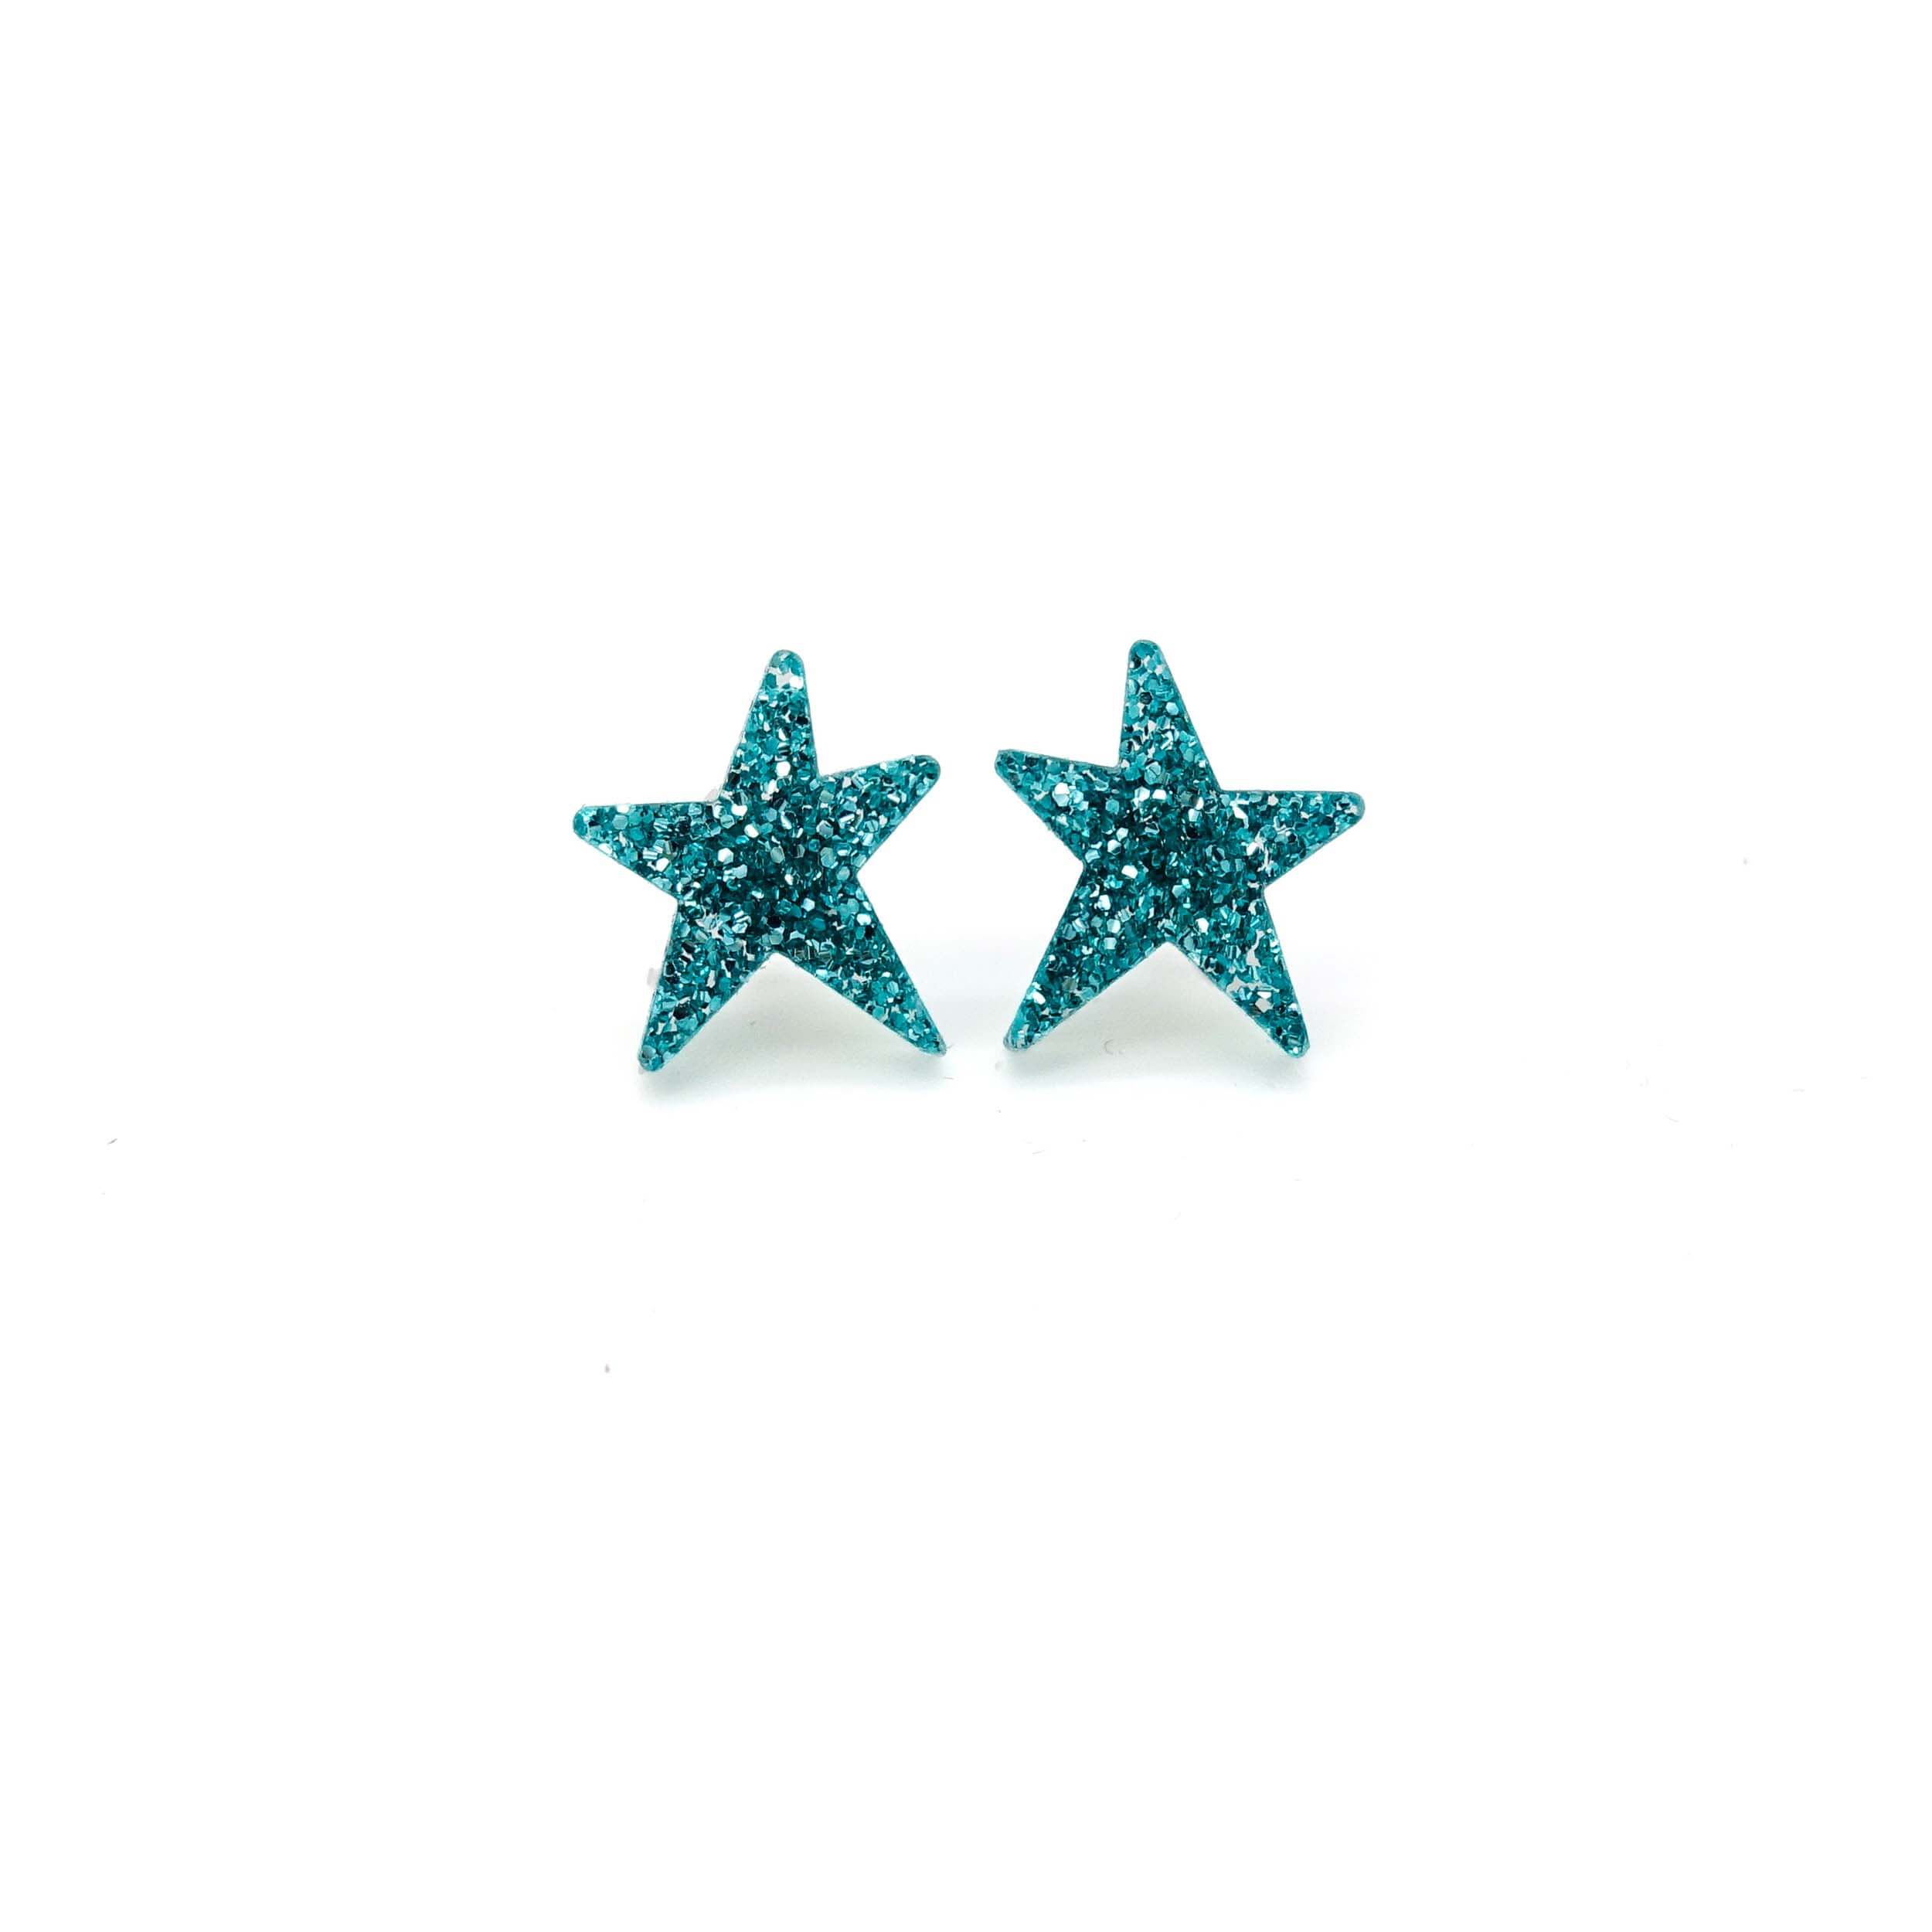 Teal glitter funky Wear and Resist star earrings shown on a white background. 